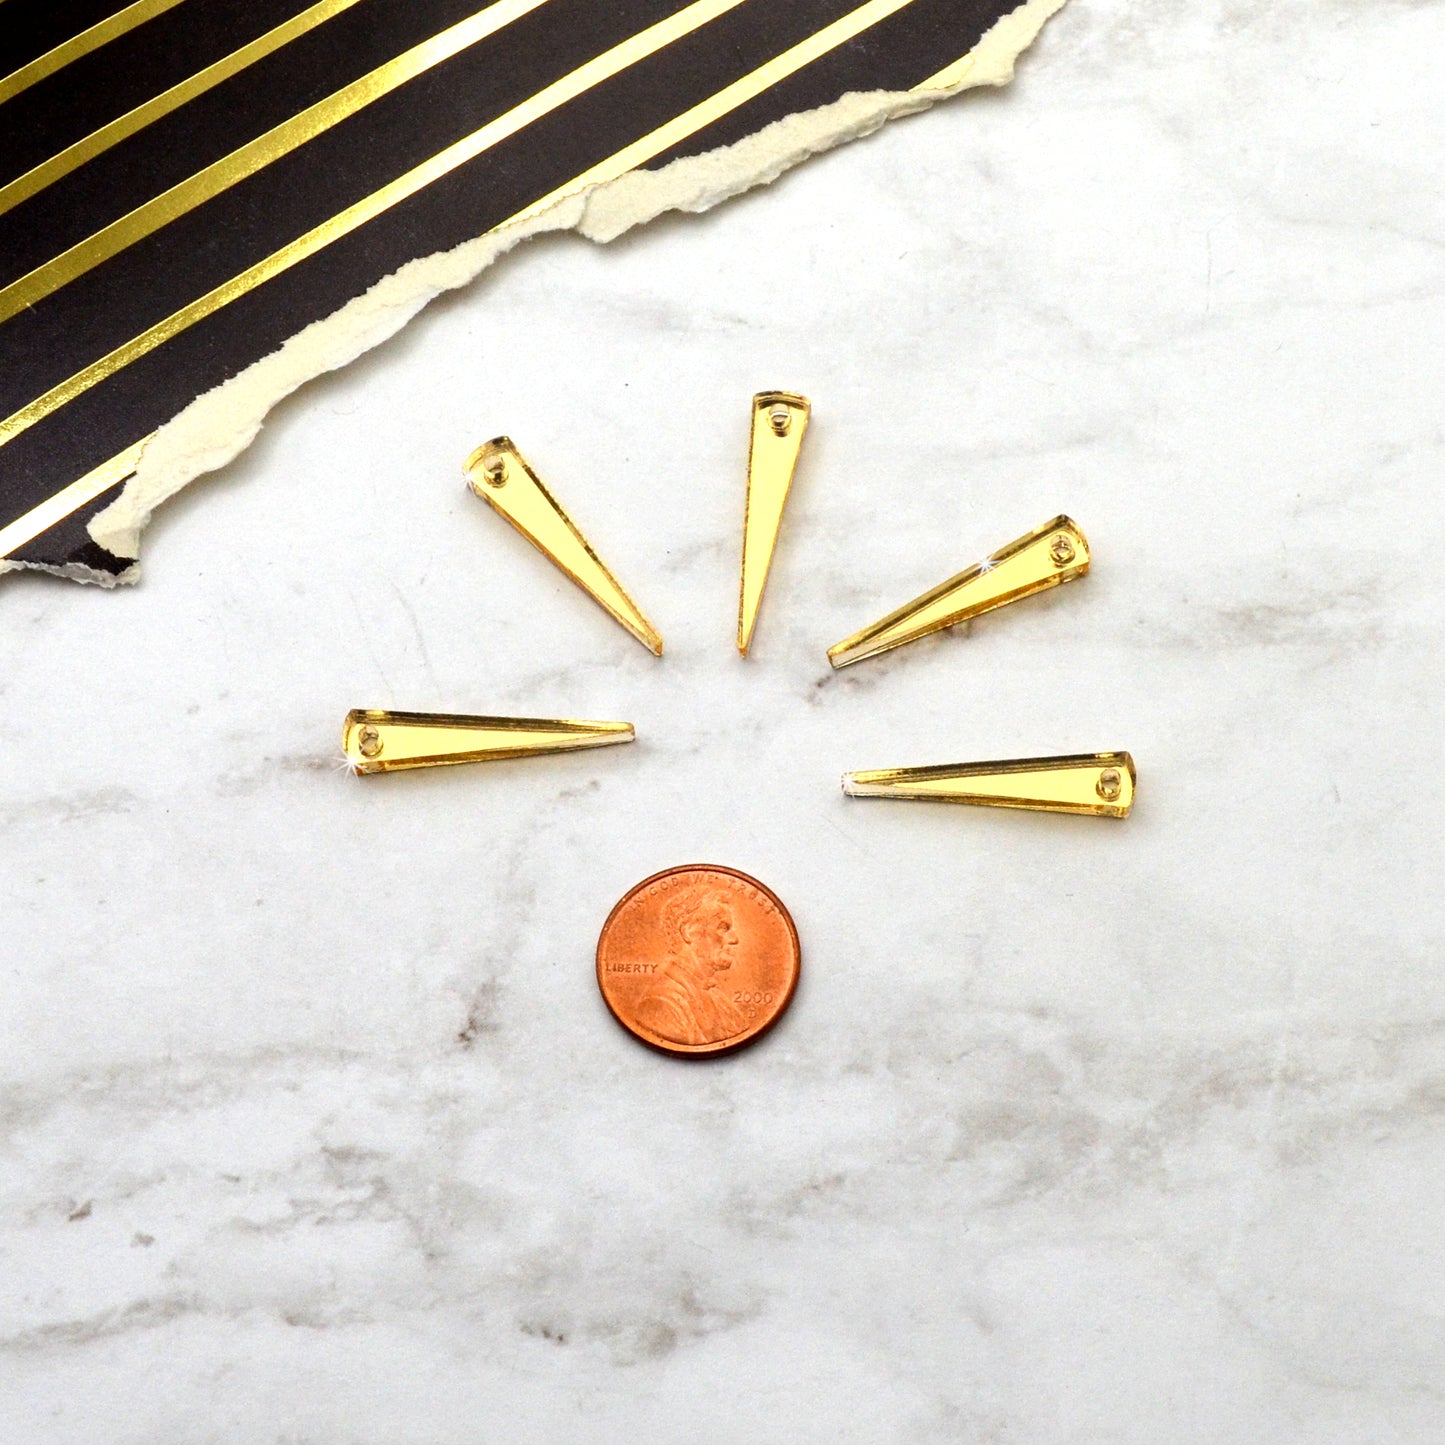 GOLD MIRROR SPIKES -  Laser Cut Acrylic Spike Charms - Set of 5